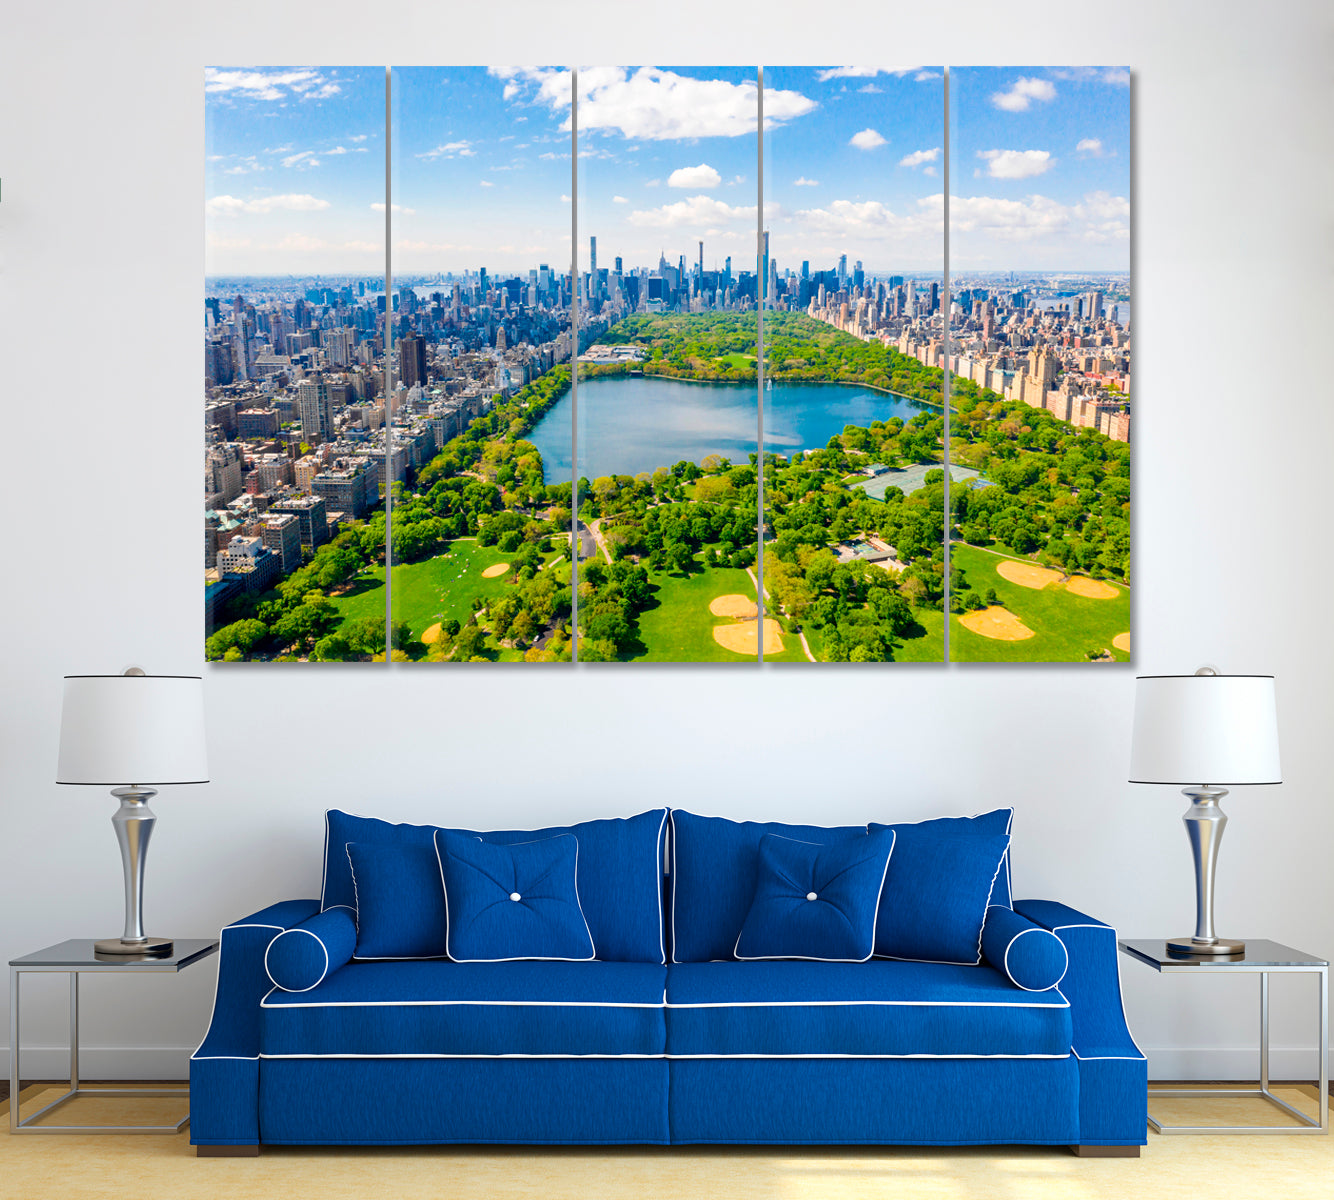 New York Central Park with Golf Course and Skyscrapers Canvas Print ArtLexy 5 Panels 36"x24" inches 